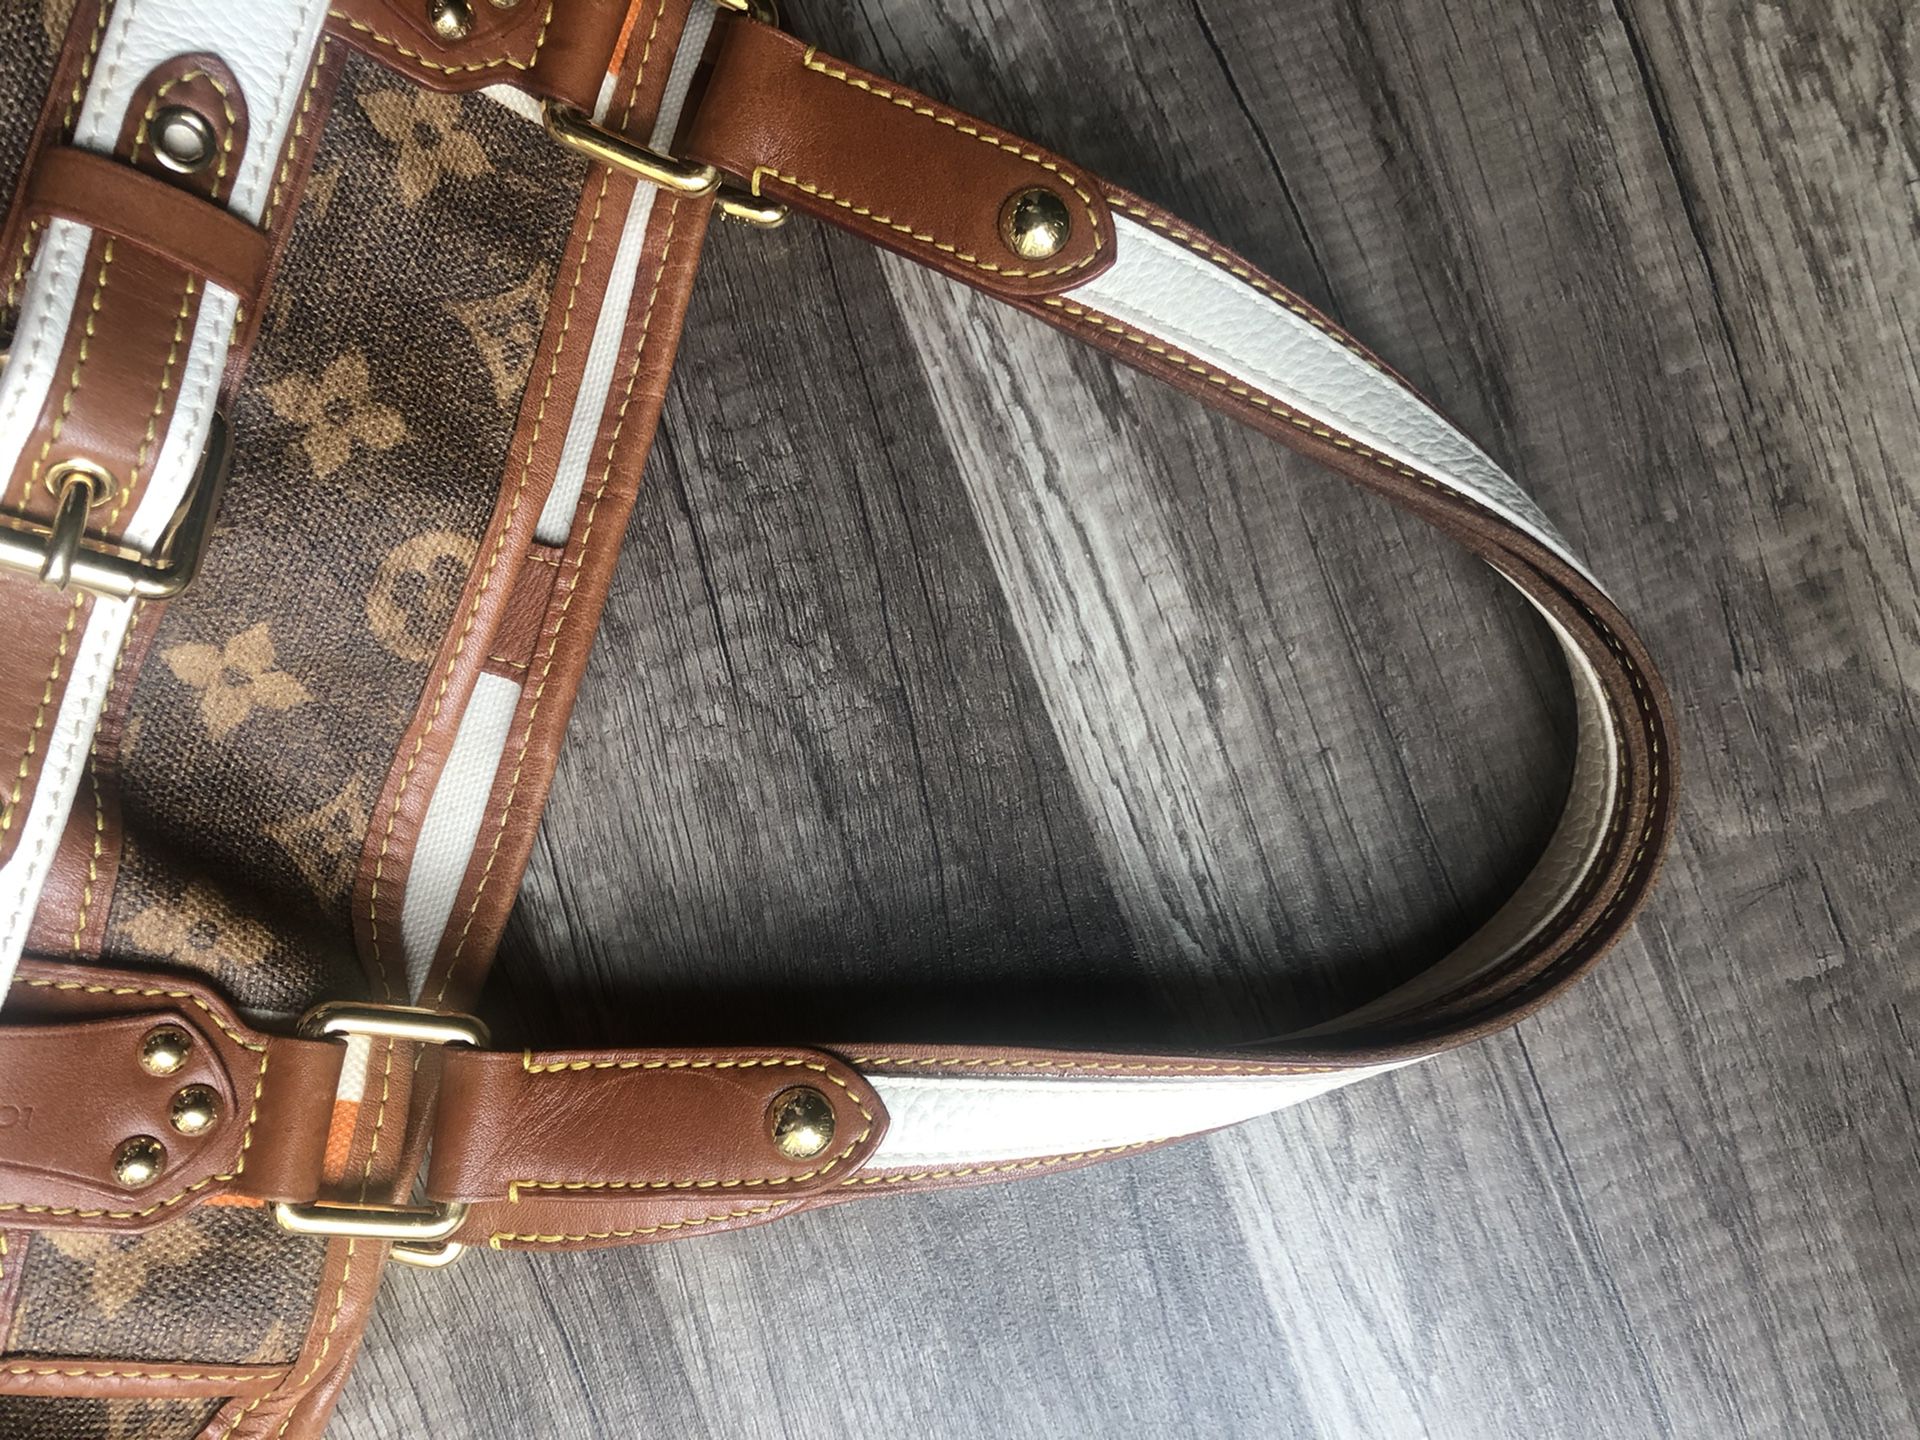 Louis Vuitton Papillon 19 From 2004 for Sale in Yorba Linda, CA - OfferUp